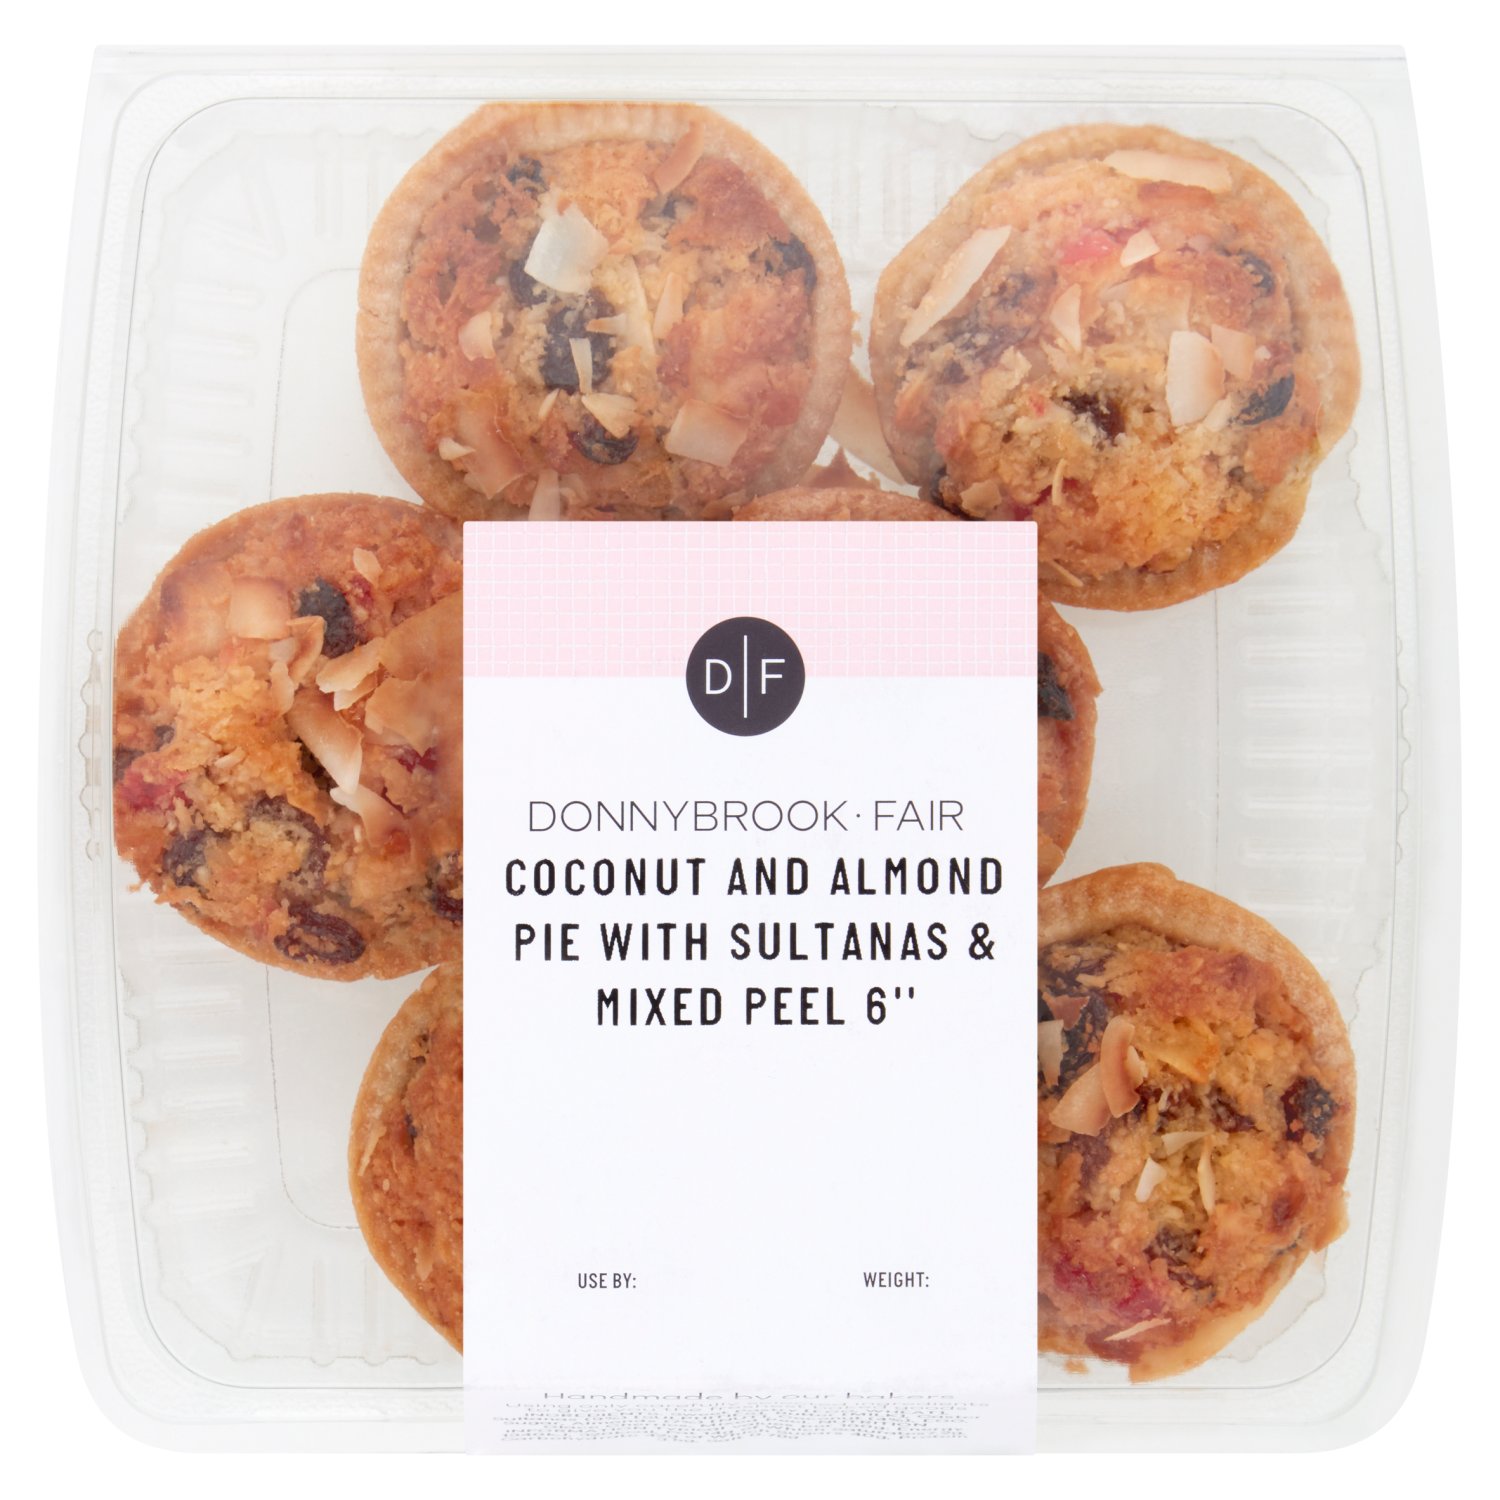 Donnybrook Fair Coconut And Almond Pie With Sultanas & Mixed Peel 6" (400 g)